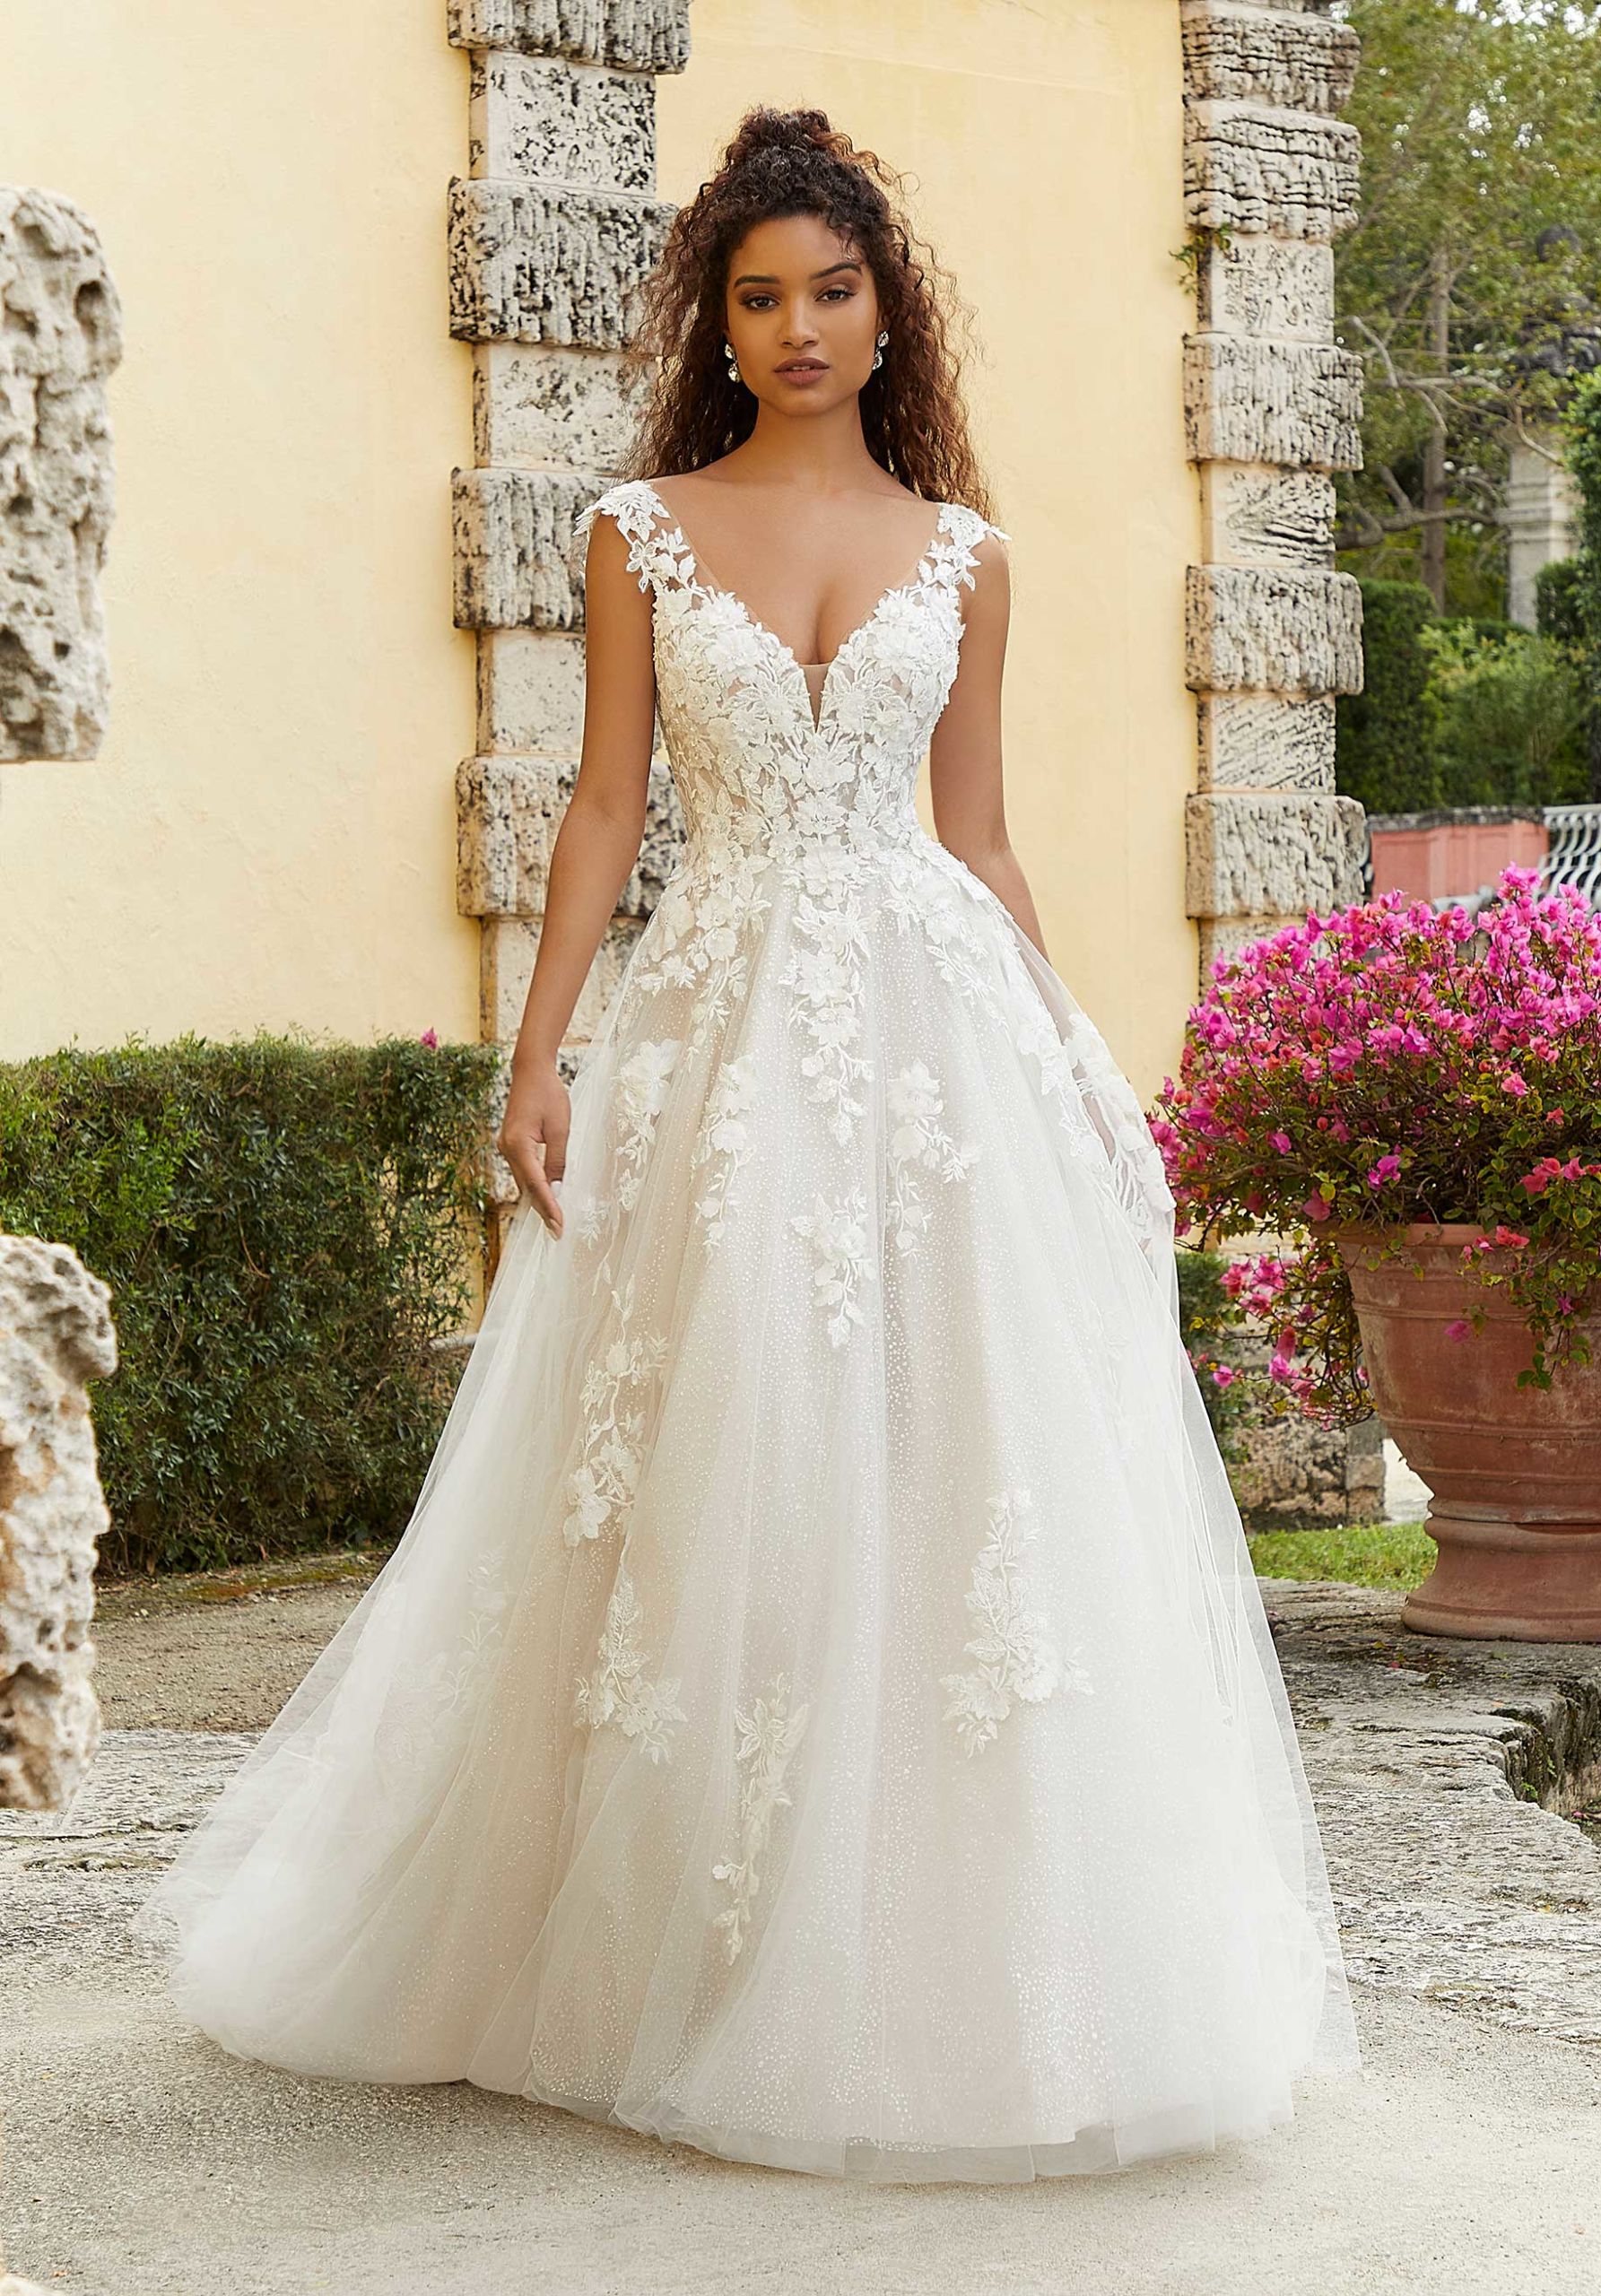 Grace Kellyinspired wedding dresses you can buy  Reviewed